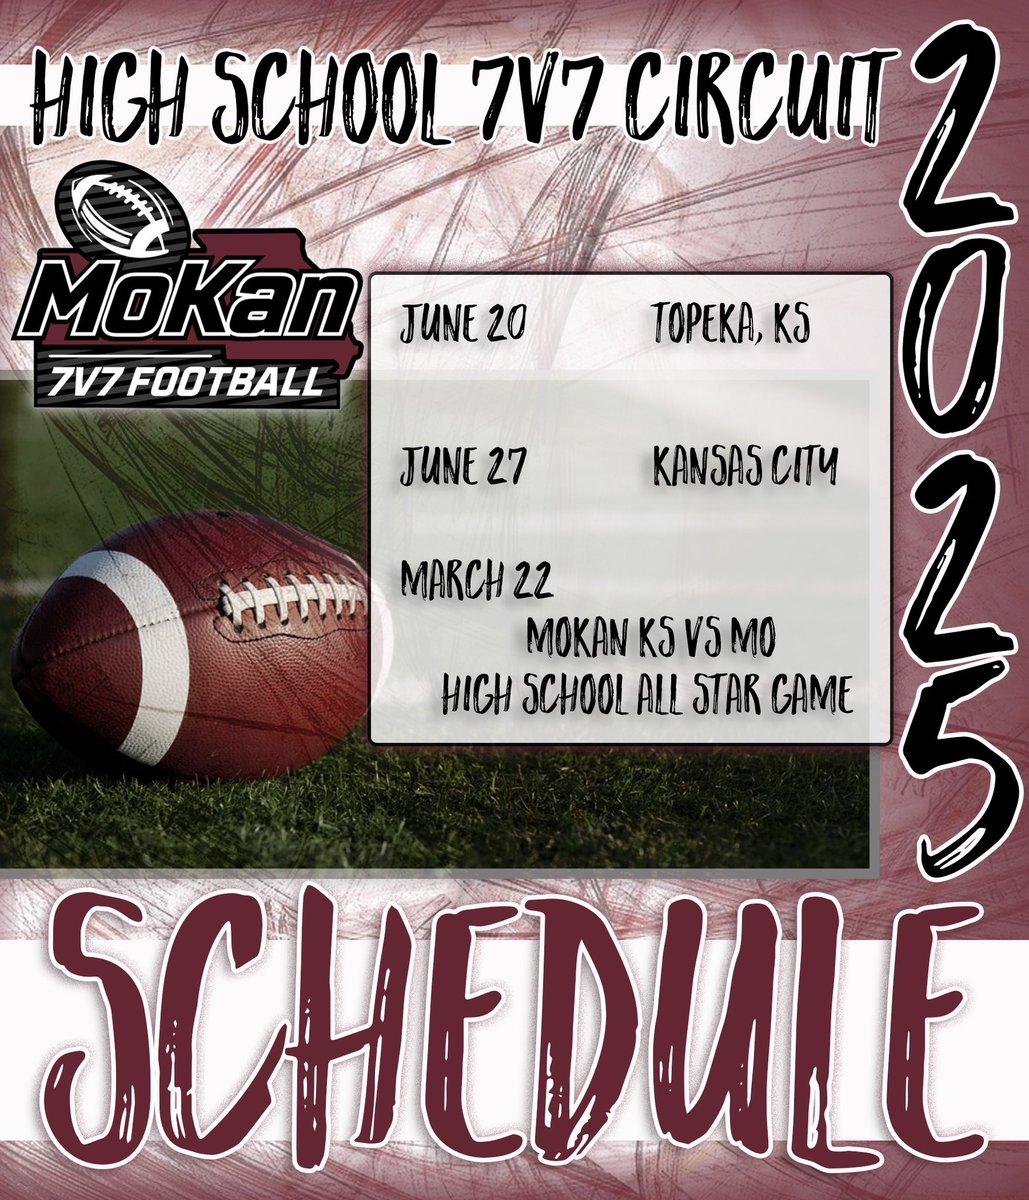 2025 SCHEDULE DROP! 🚨 Some familiar places with some new! Top venues/facilities, college visits at each tournament, & the best 7v7 experience in the country! We have been building for this 💪🏼 New for 2025: - Club All Star Game - MO vs KS HS All Star Game - HS Summer Circuit